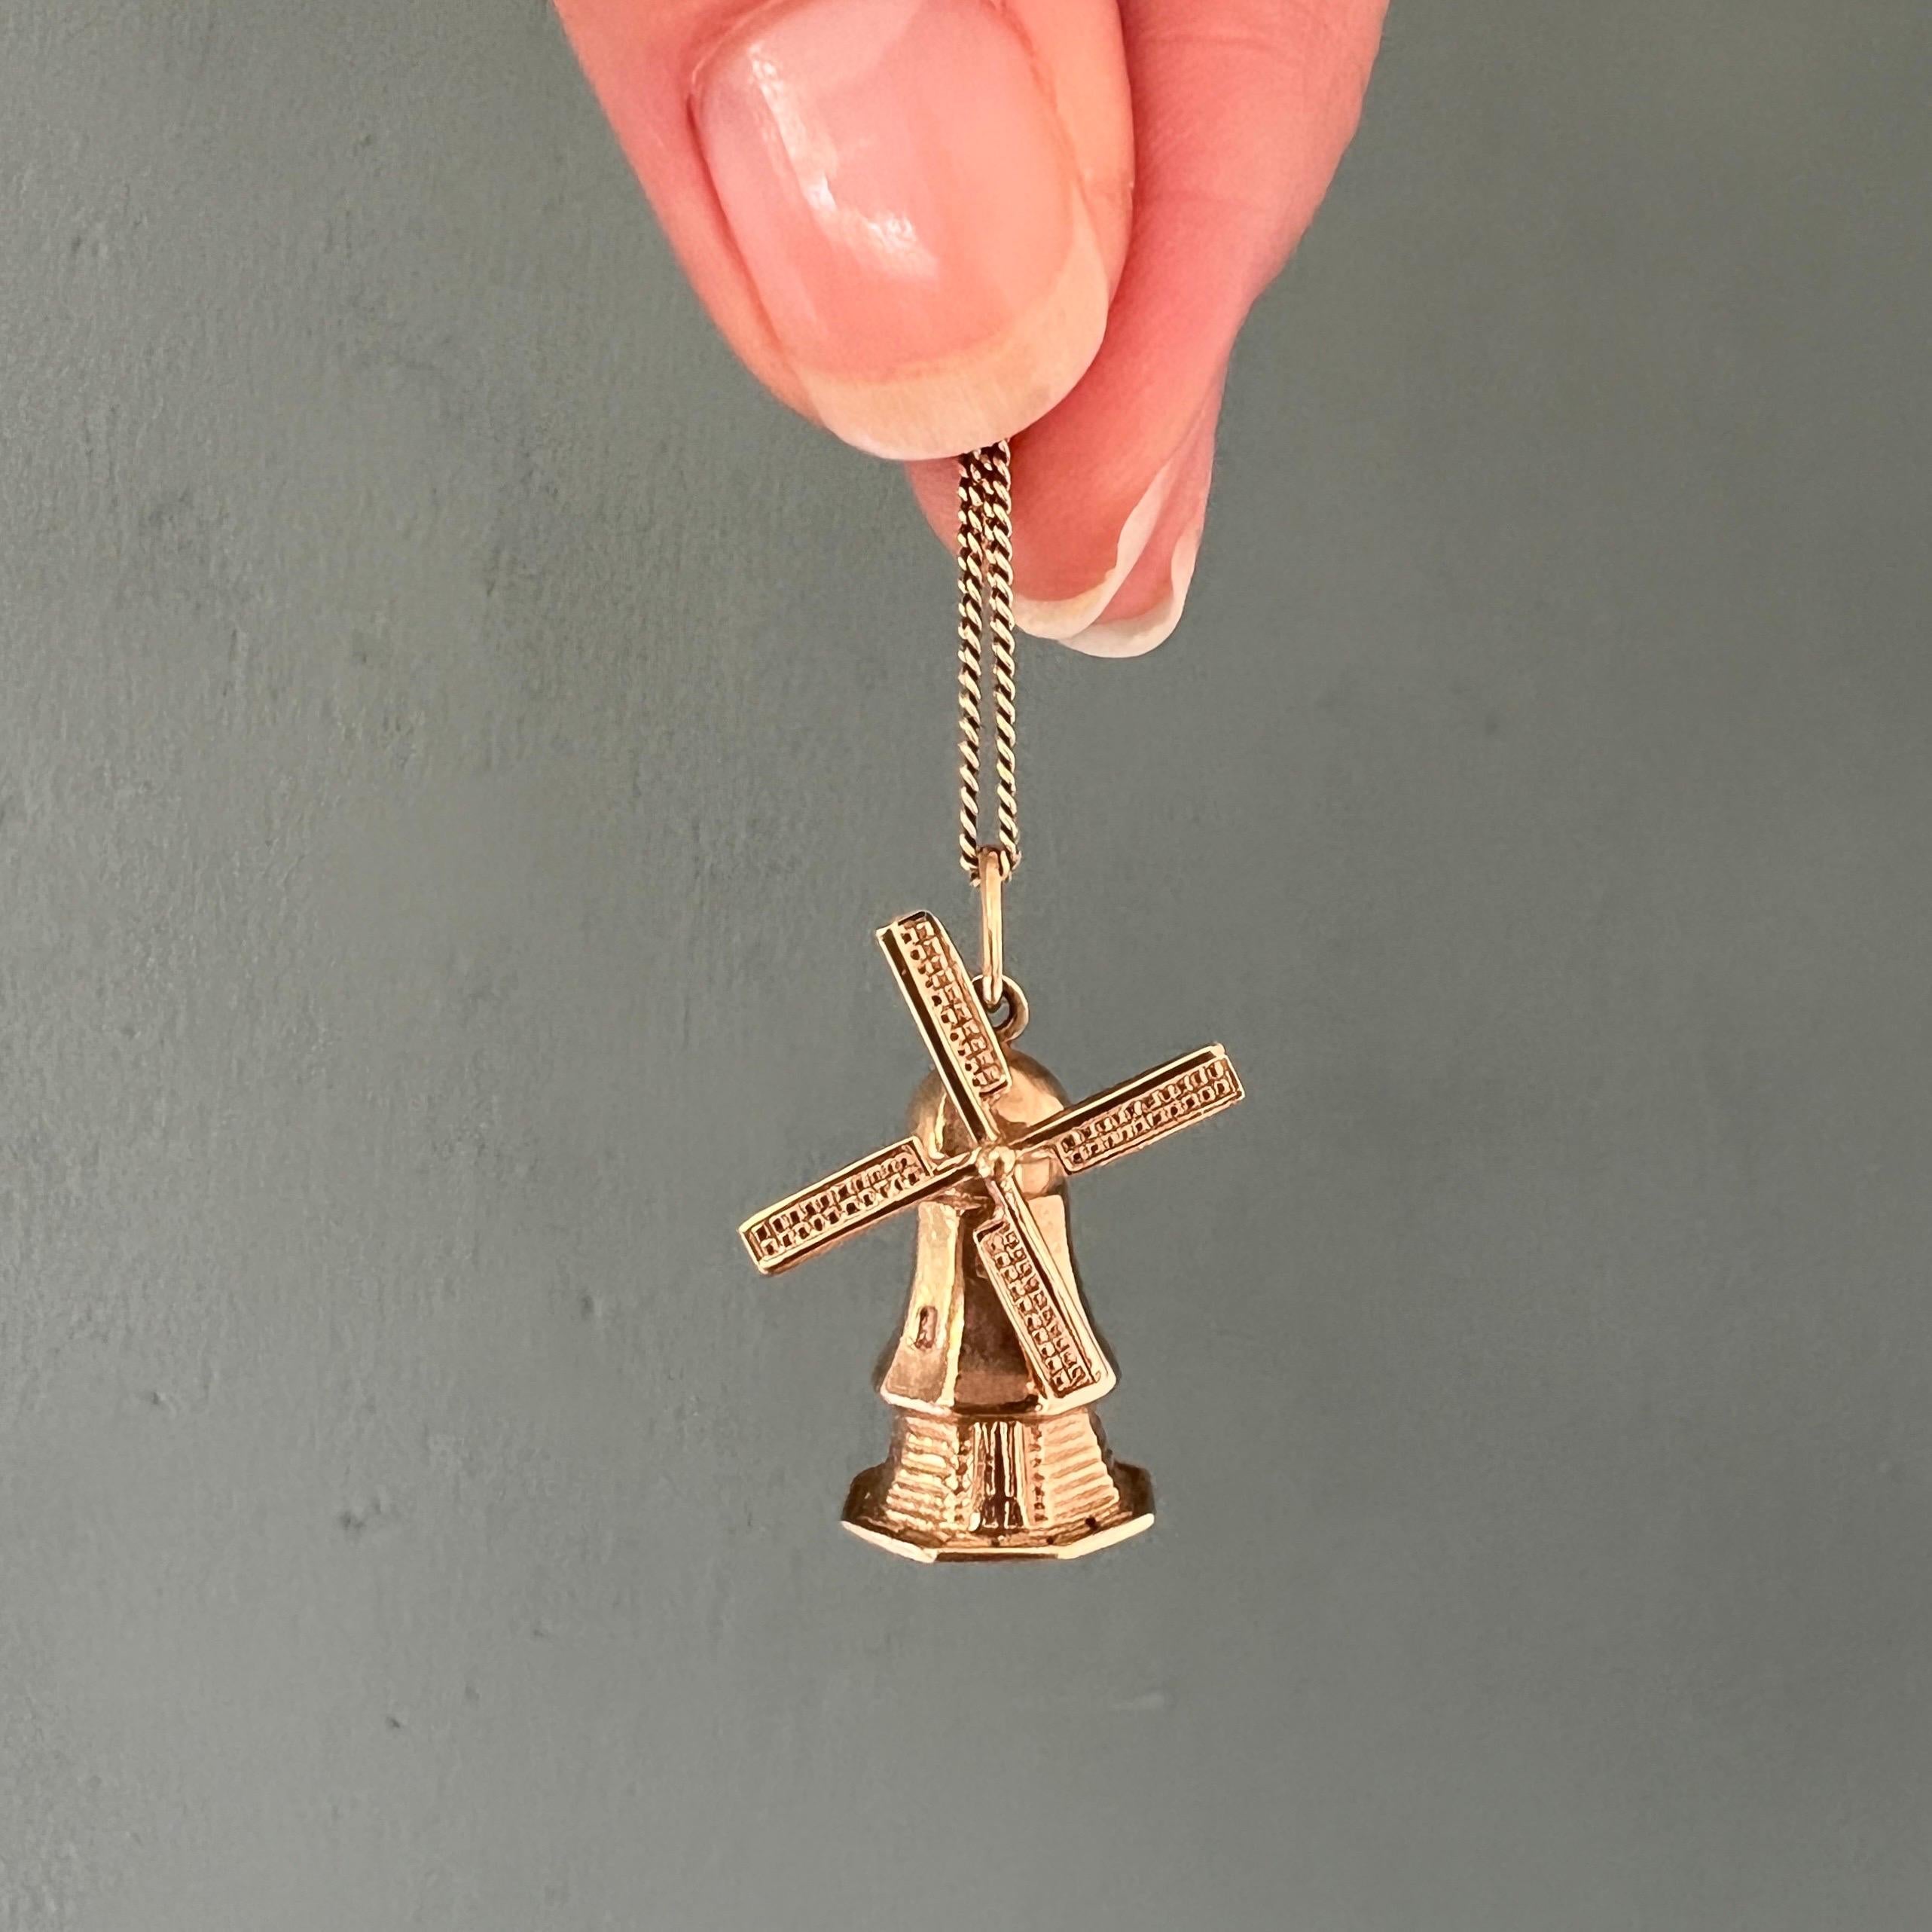 A beautiful and rare vintage large three-dimensional stylized Dutch windmill charm pendant. The octagon windmill is made in 14 karat gold and is nicely detailed with horizontal 'beams' on the hull and windows on the attic floors. The blades of the